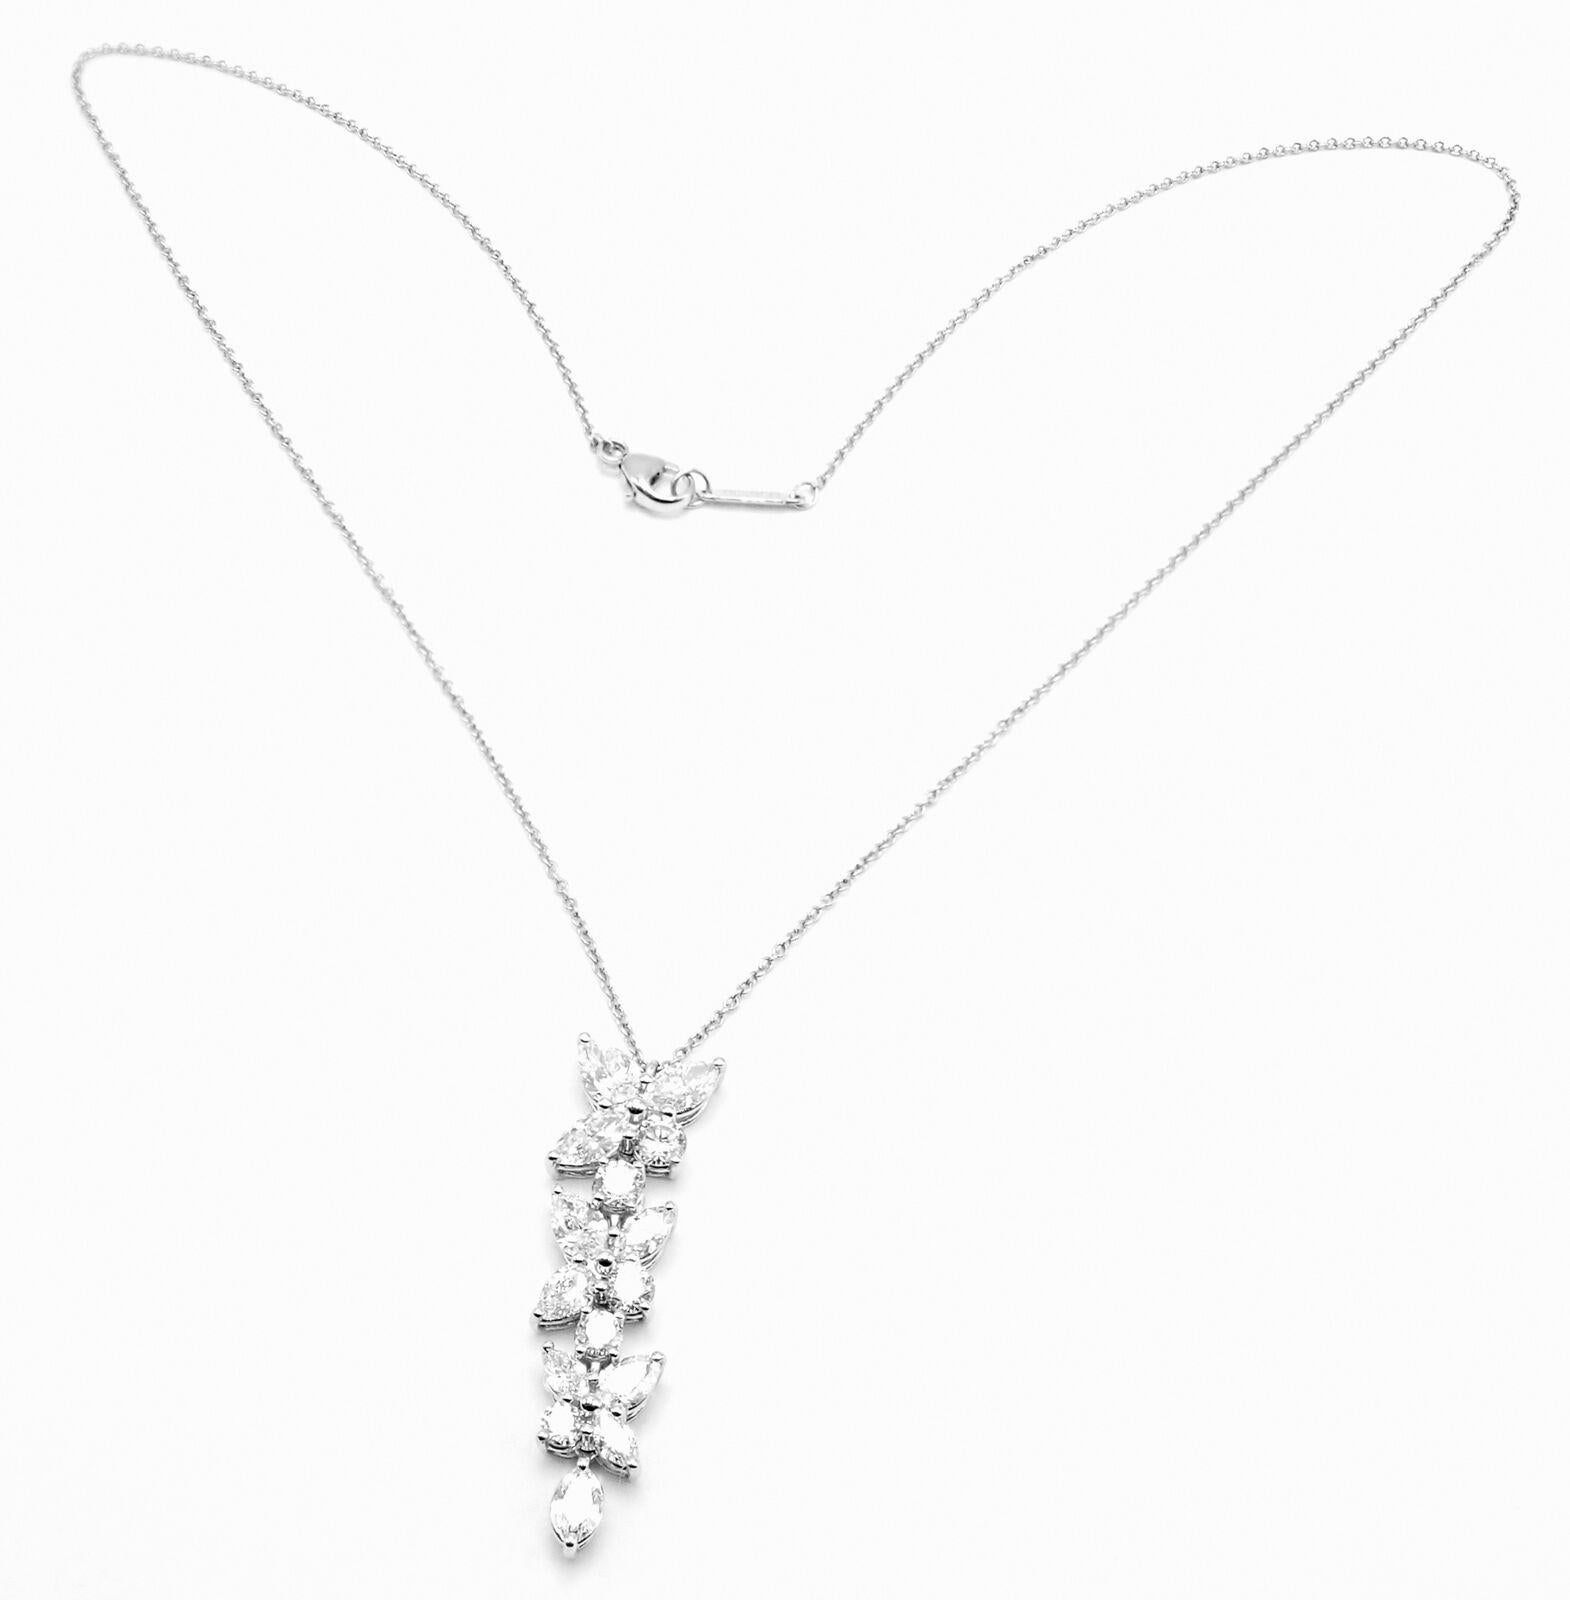 Platinum Victoria Diamond Mixed Cluster Drop Pendant Necklace by Tiffany & Co. 
With Marque shape diamonds VS1 clarity, E color total weight approximately .83ct
Pear shape diamonds VS1 clarity, E color total weight approximately .74ct
Round